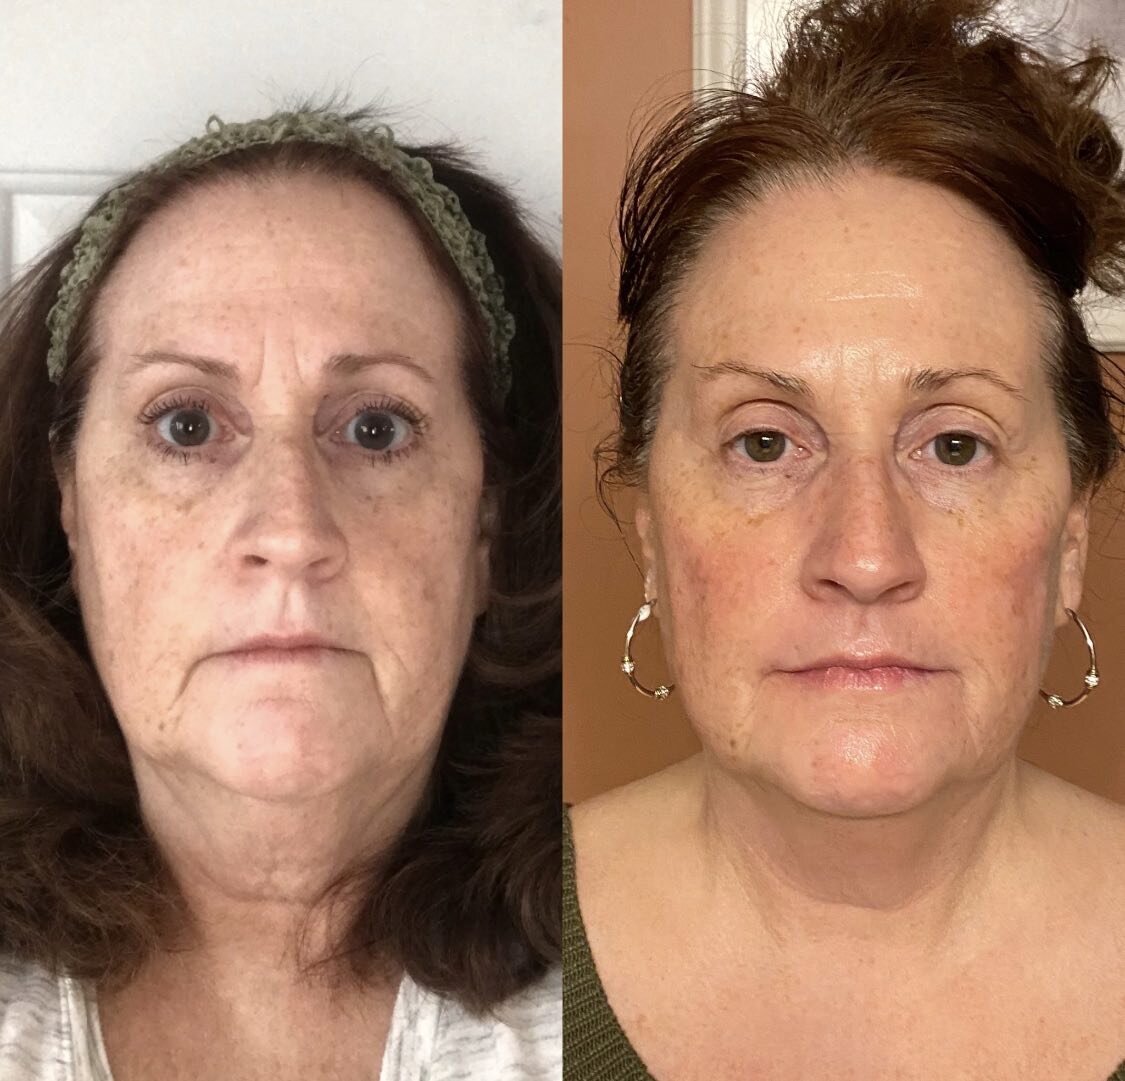 LOVE LOVE LOVE when patients send me their before and after photos. This lovely lady wanted to take baby steps. Her treatment plan will continue in August. ❤️